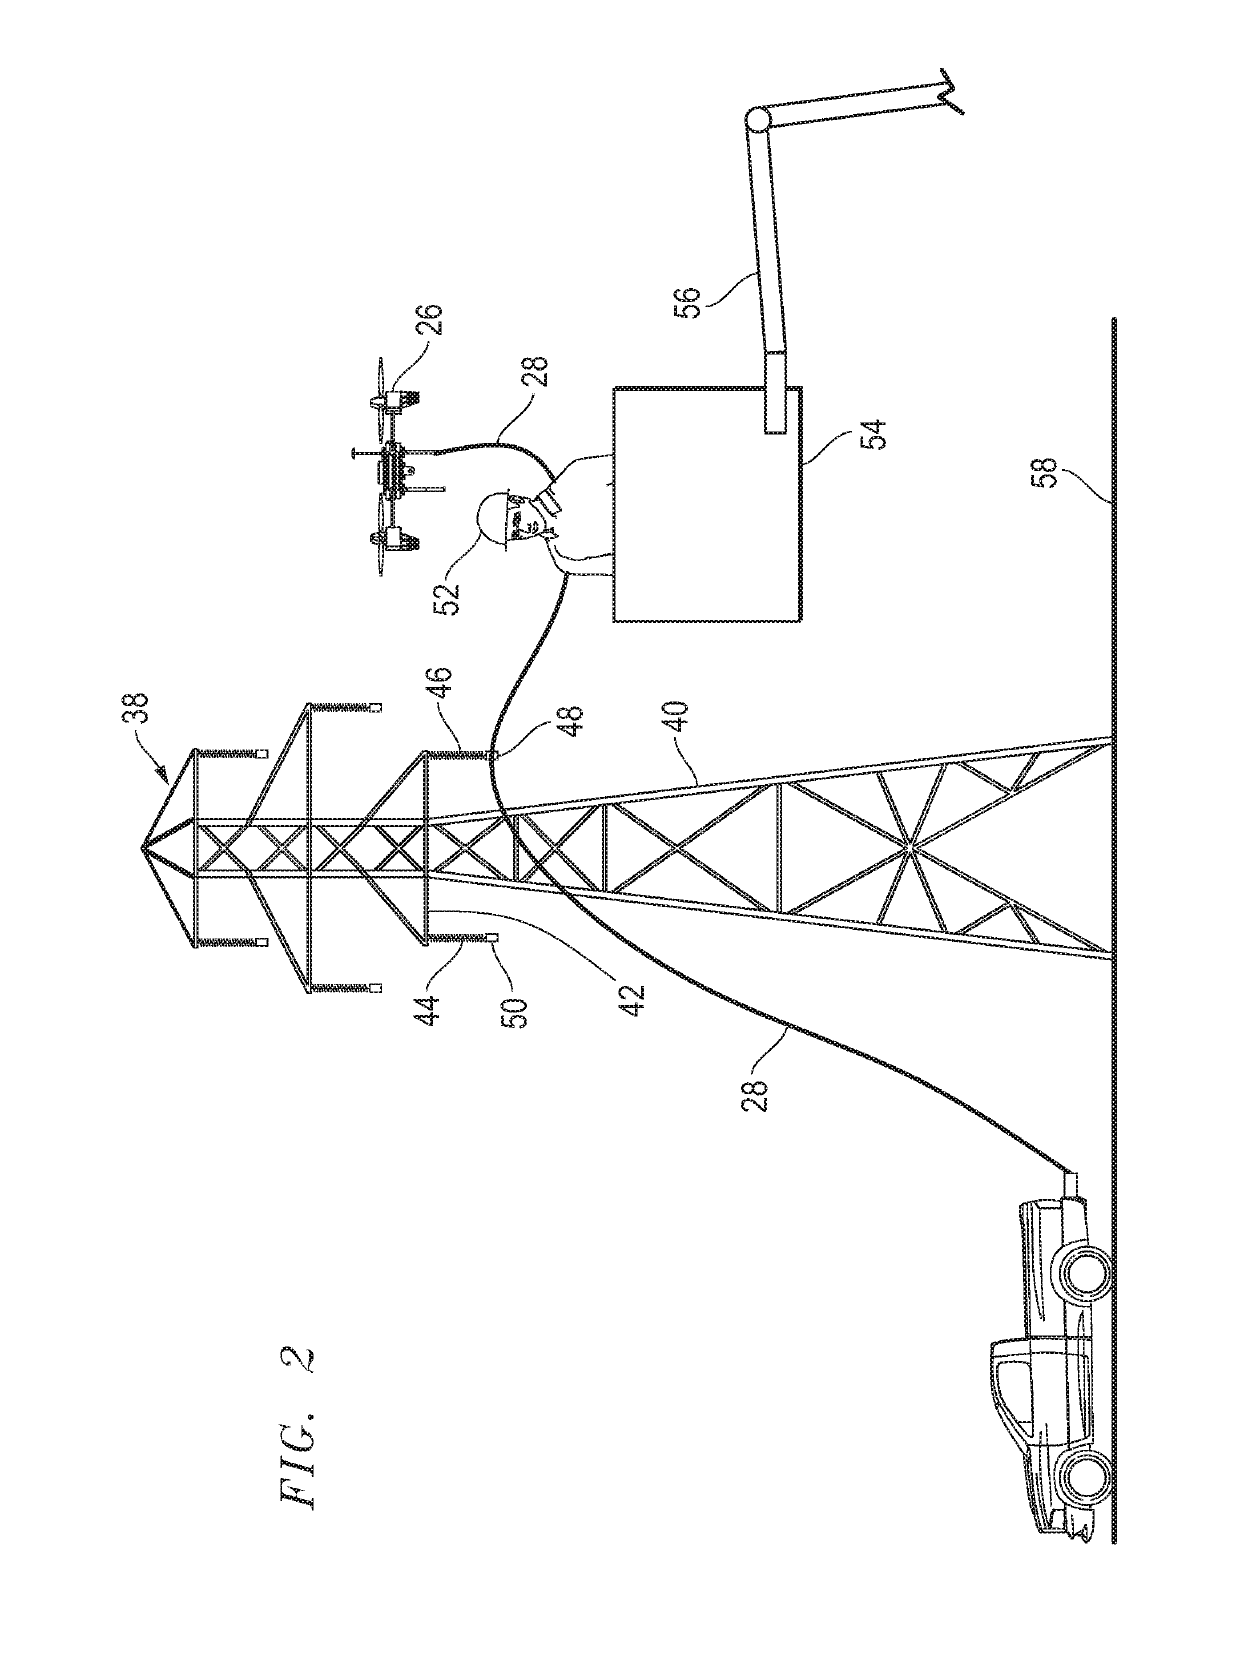 Apparatus and method for placing and tensioning an aerial rope through a traveler of a power line